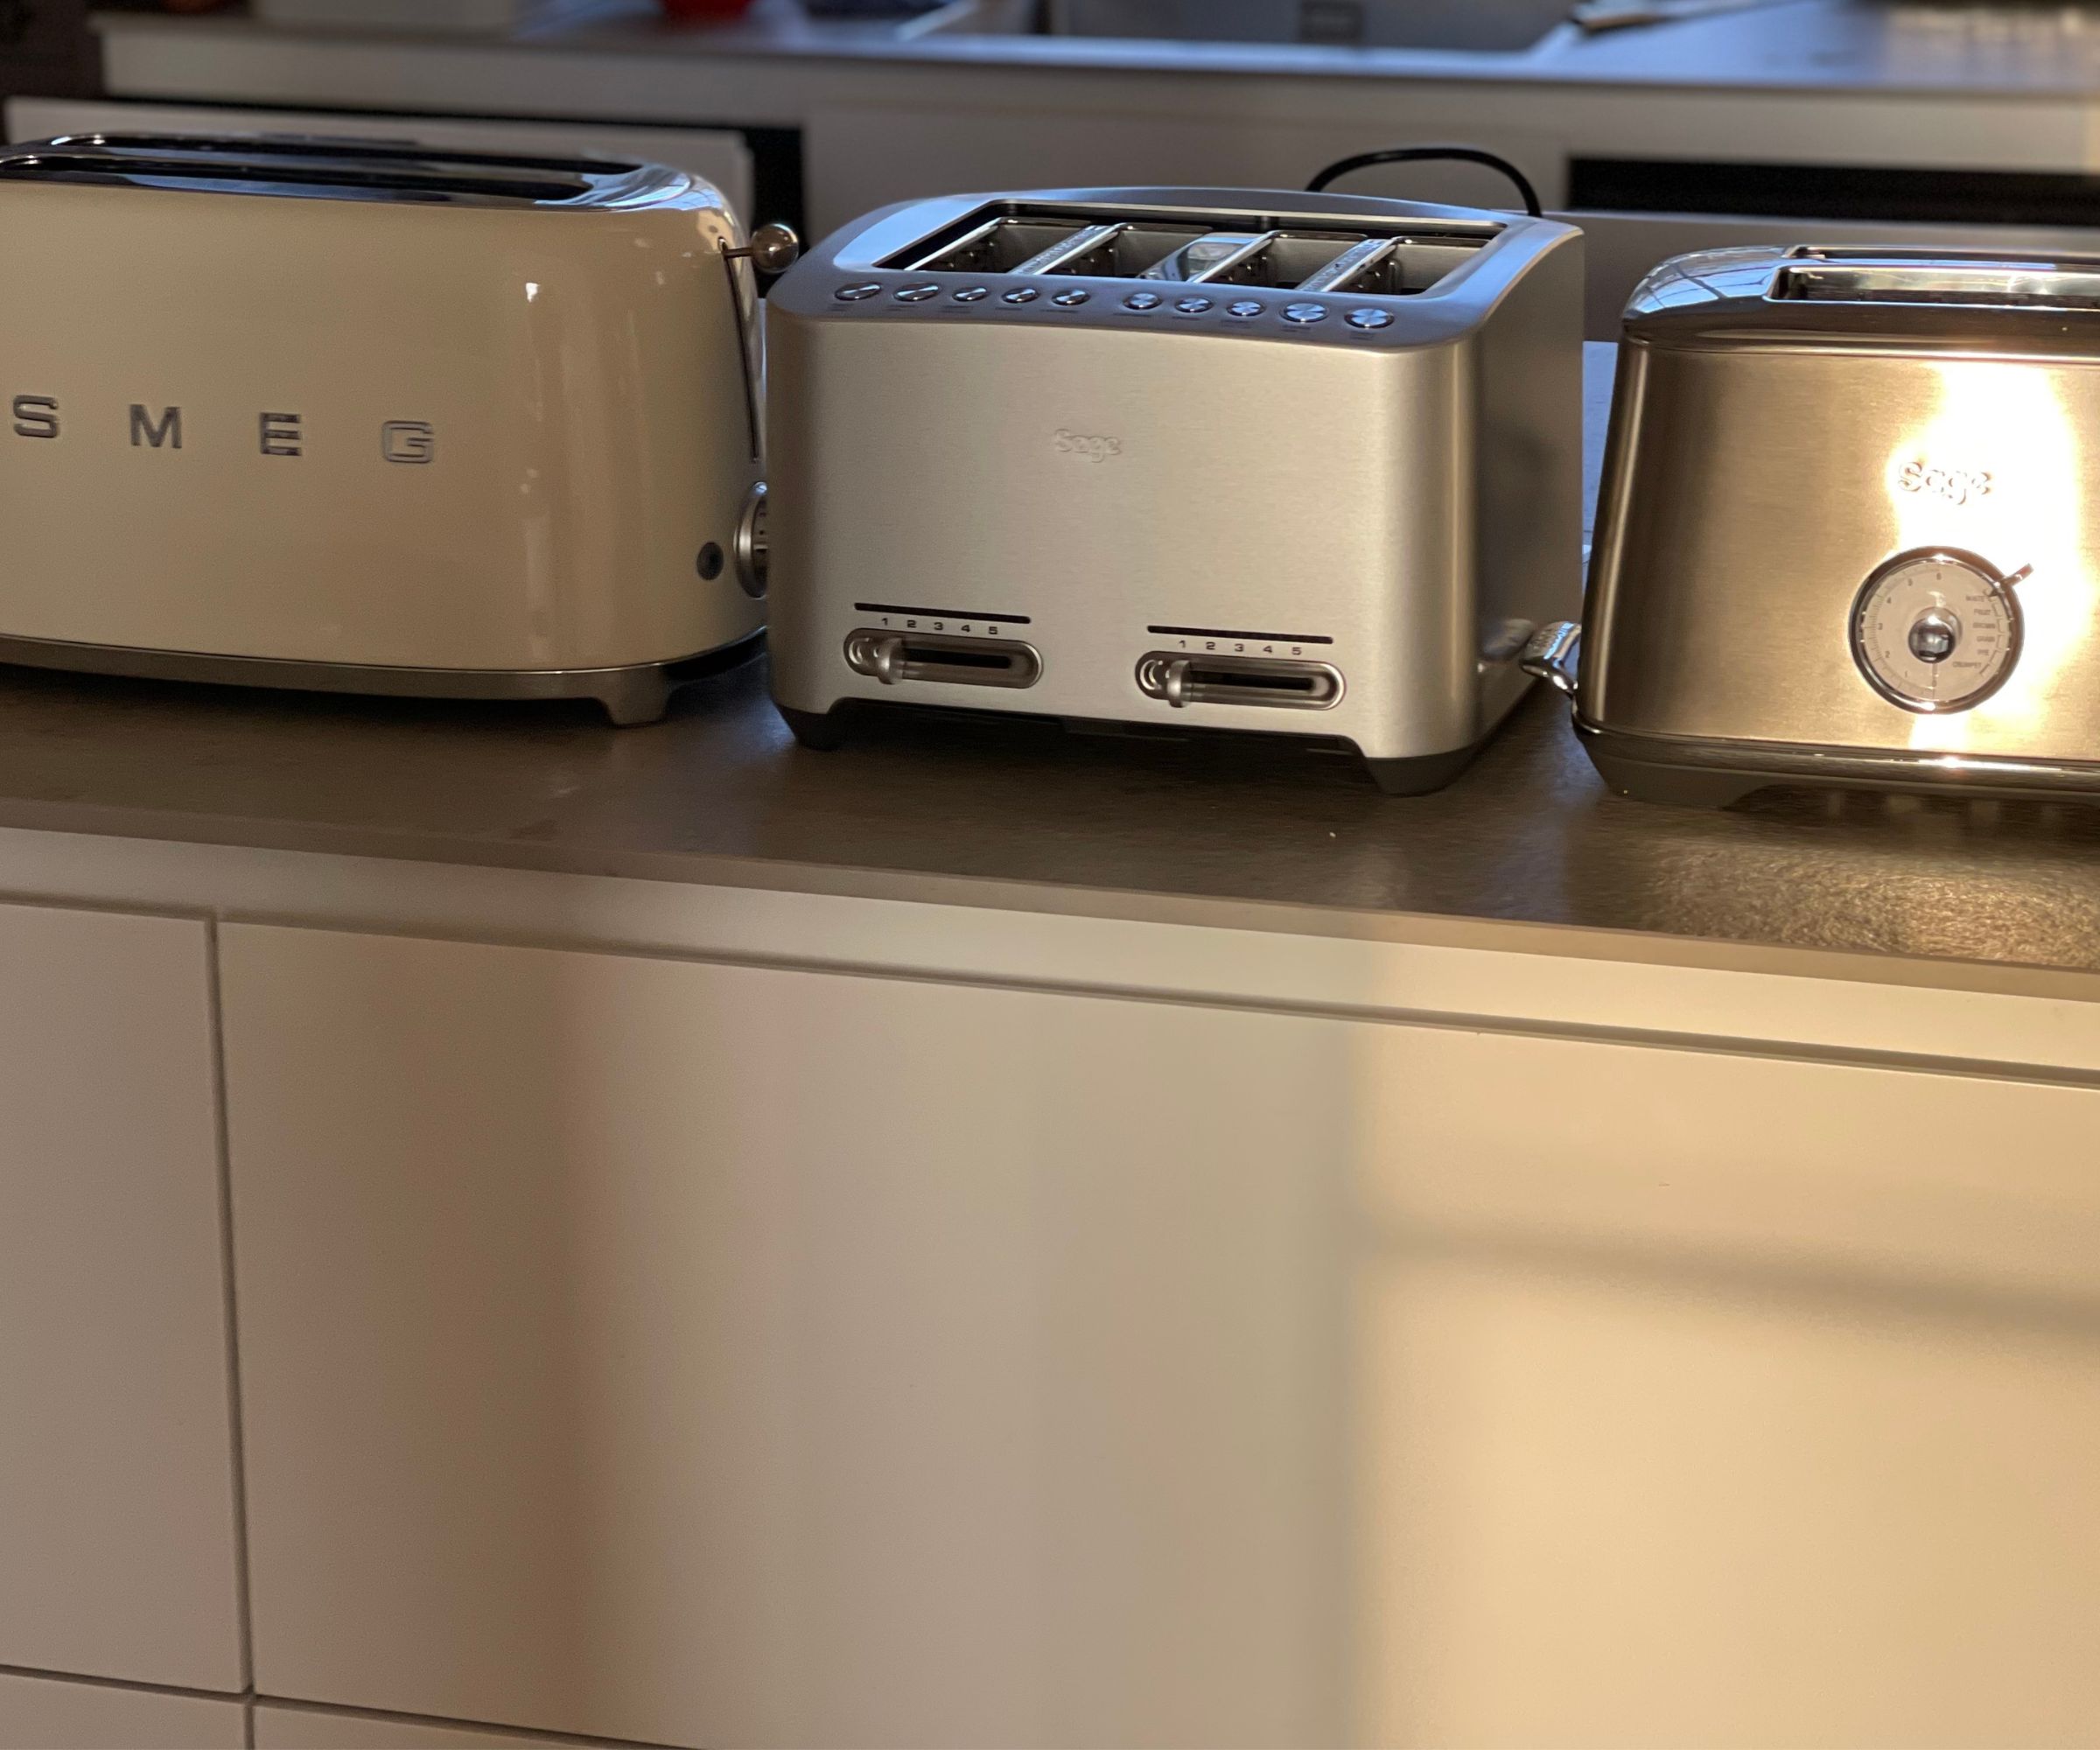 The Smeg toaster next to two Breville toasters on the countertop